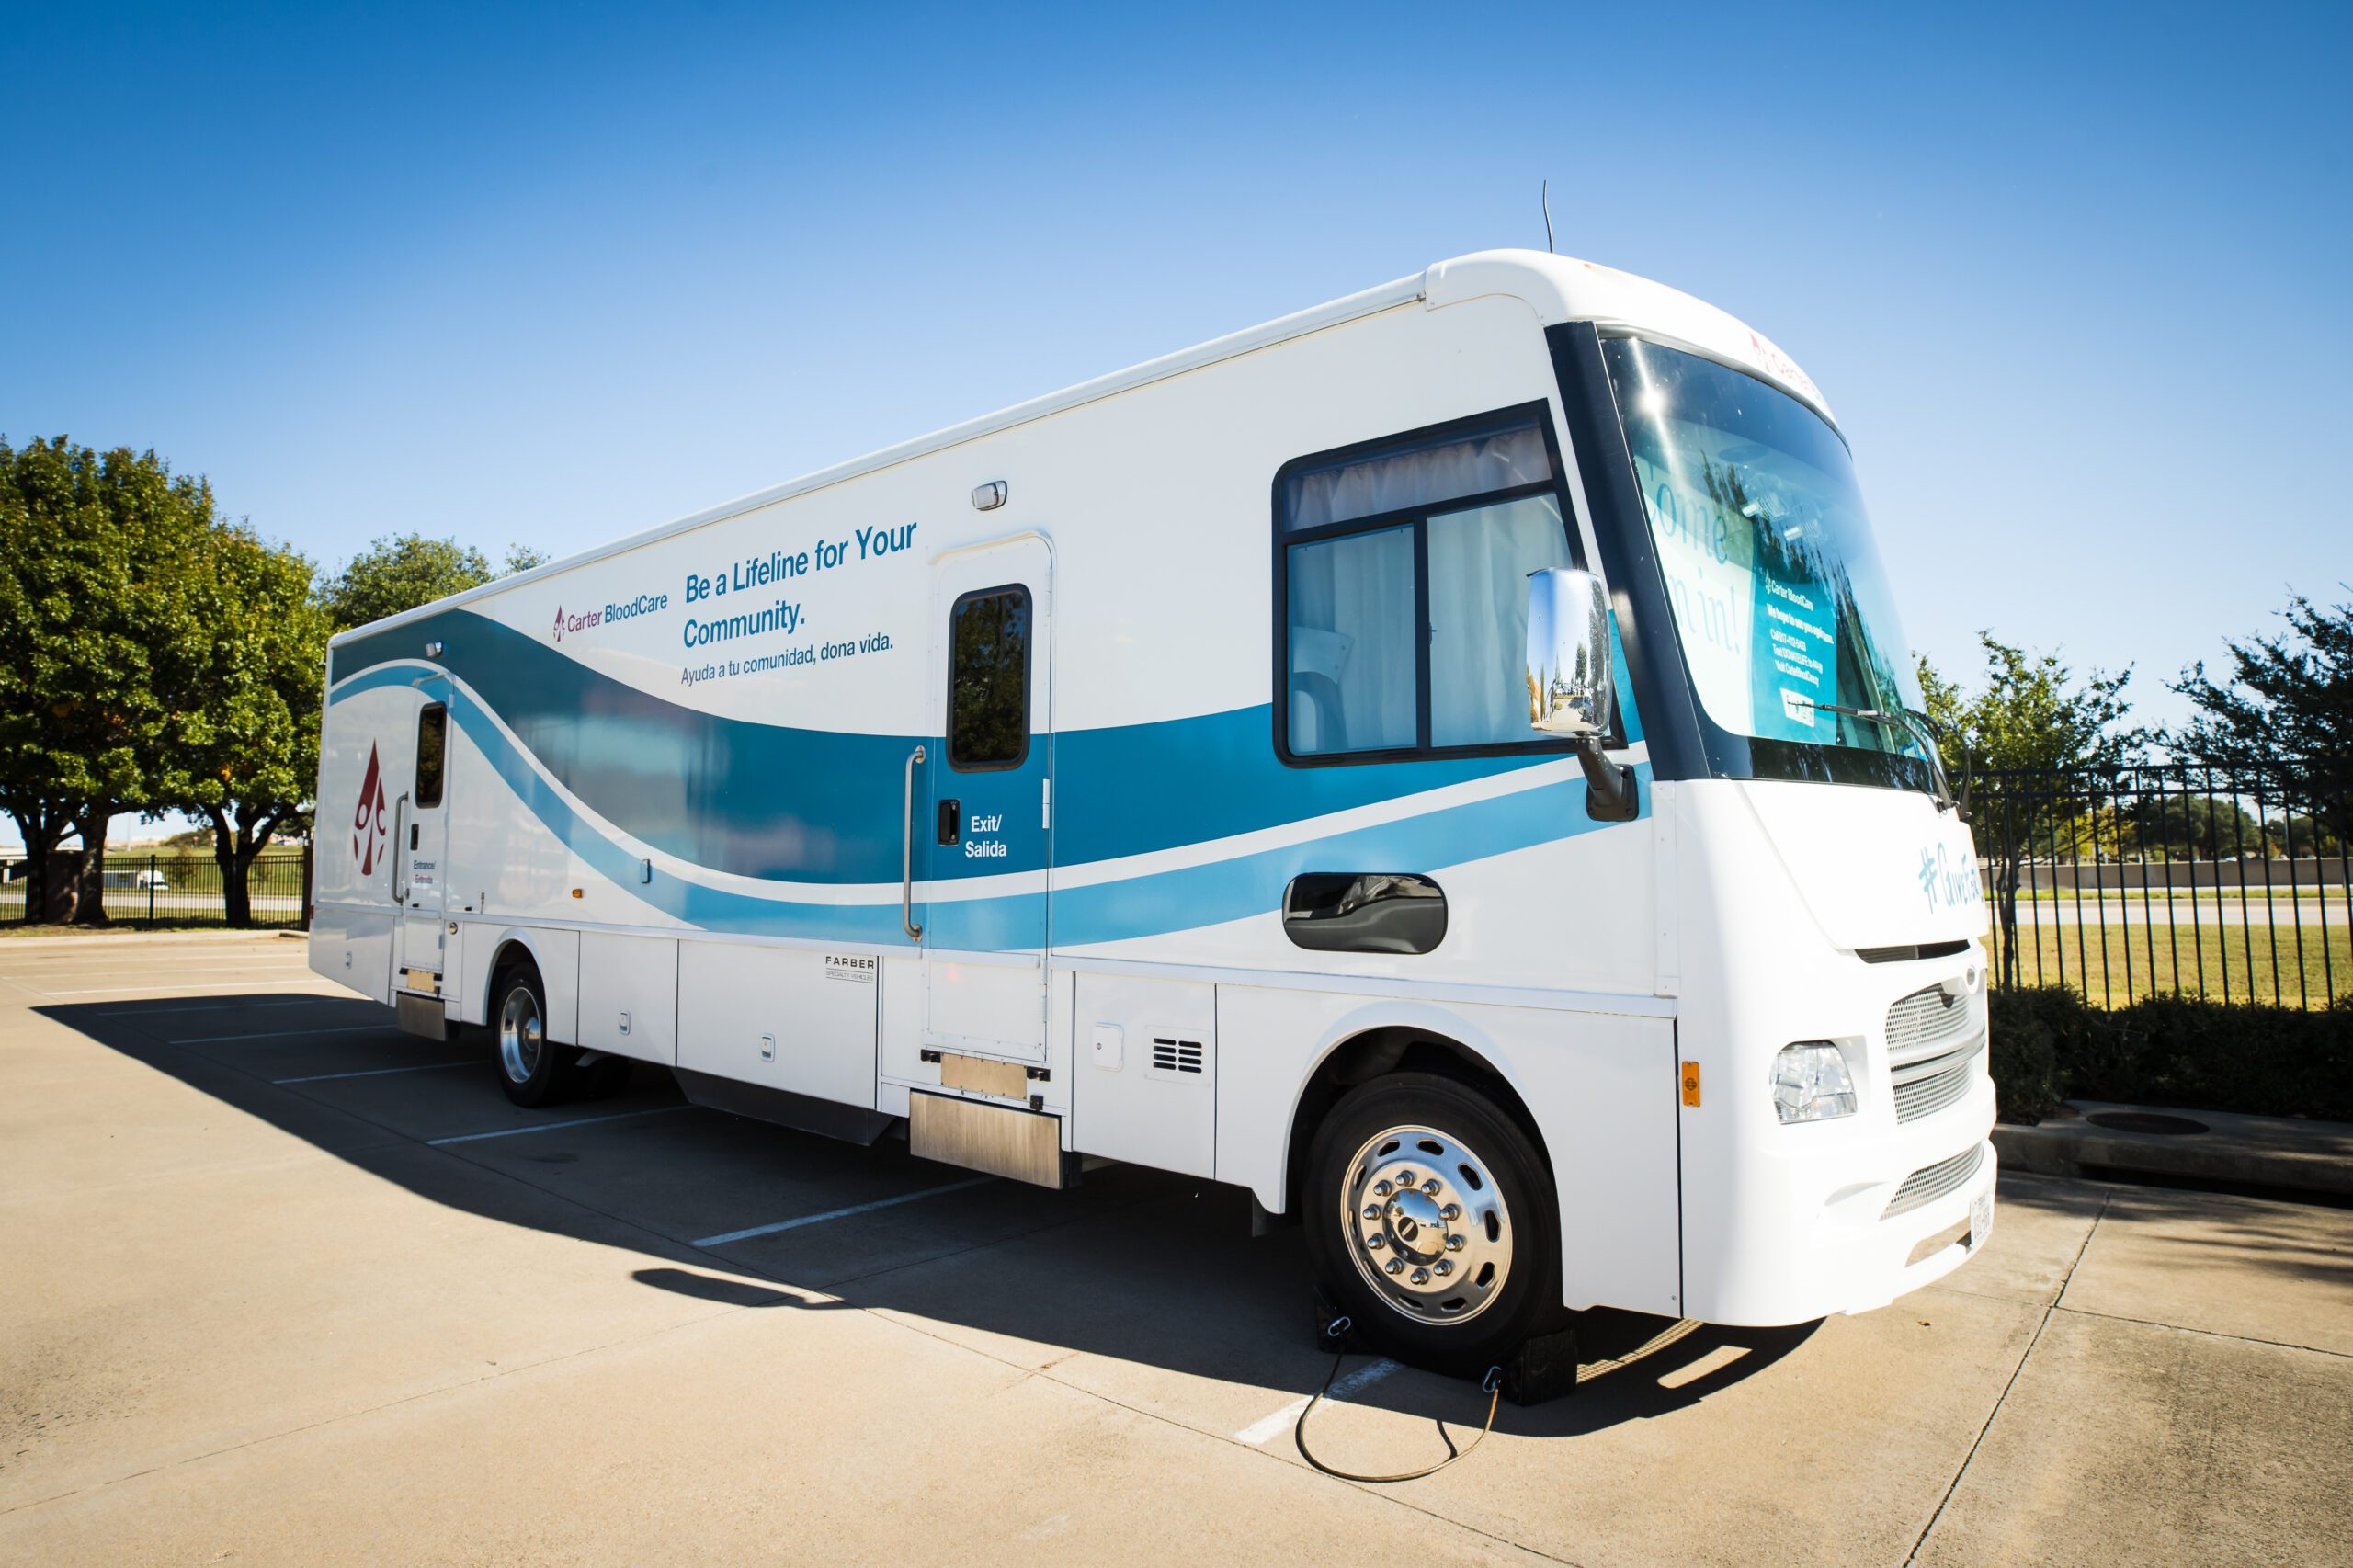 Carter BloodCare Mobile Blood Drive